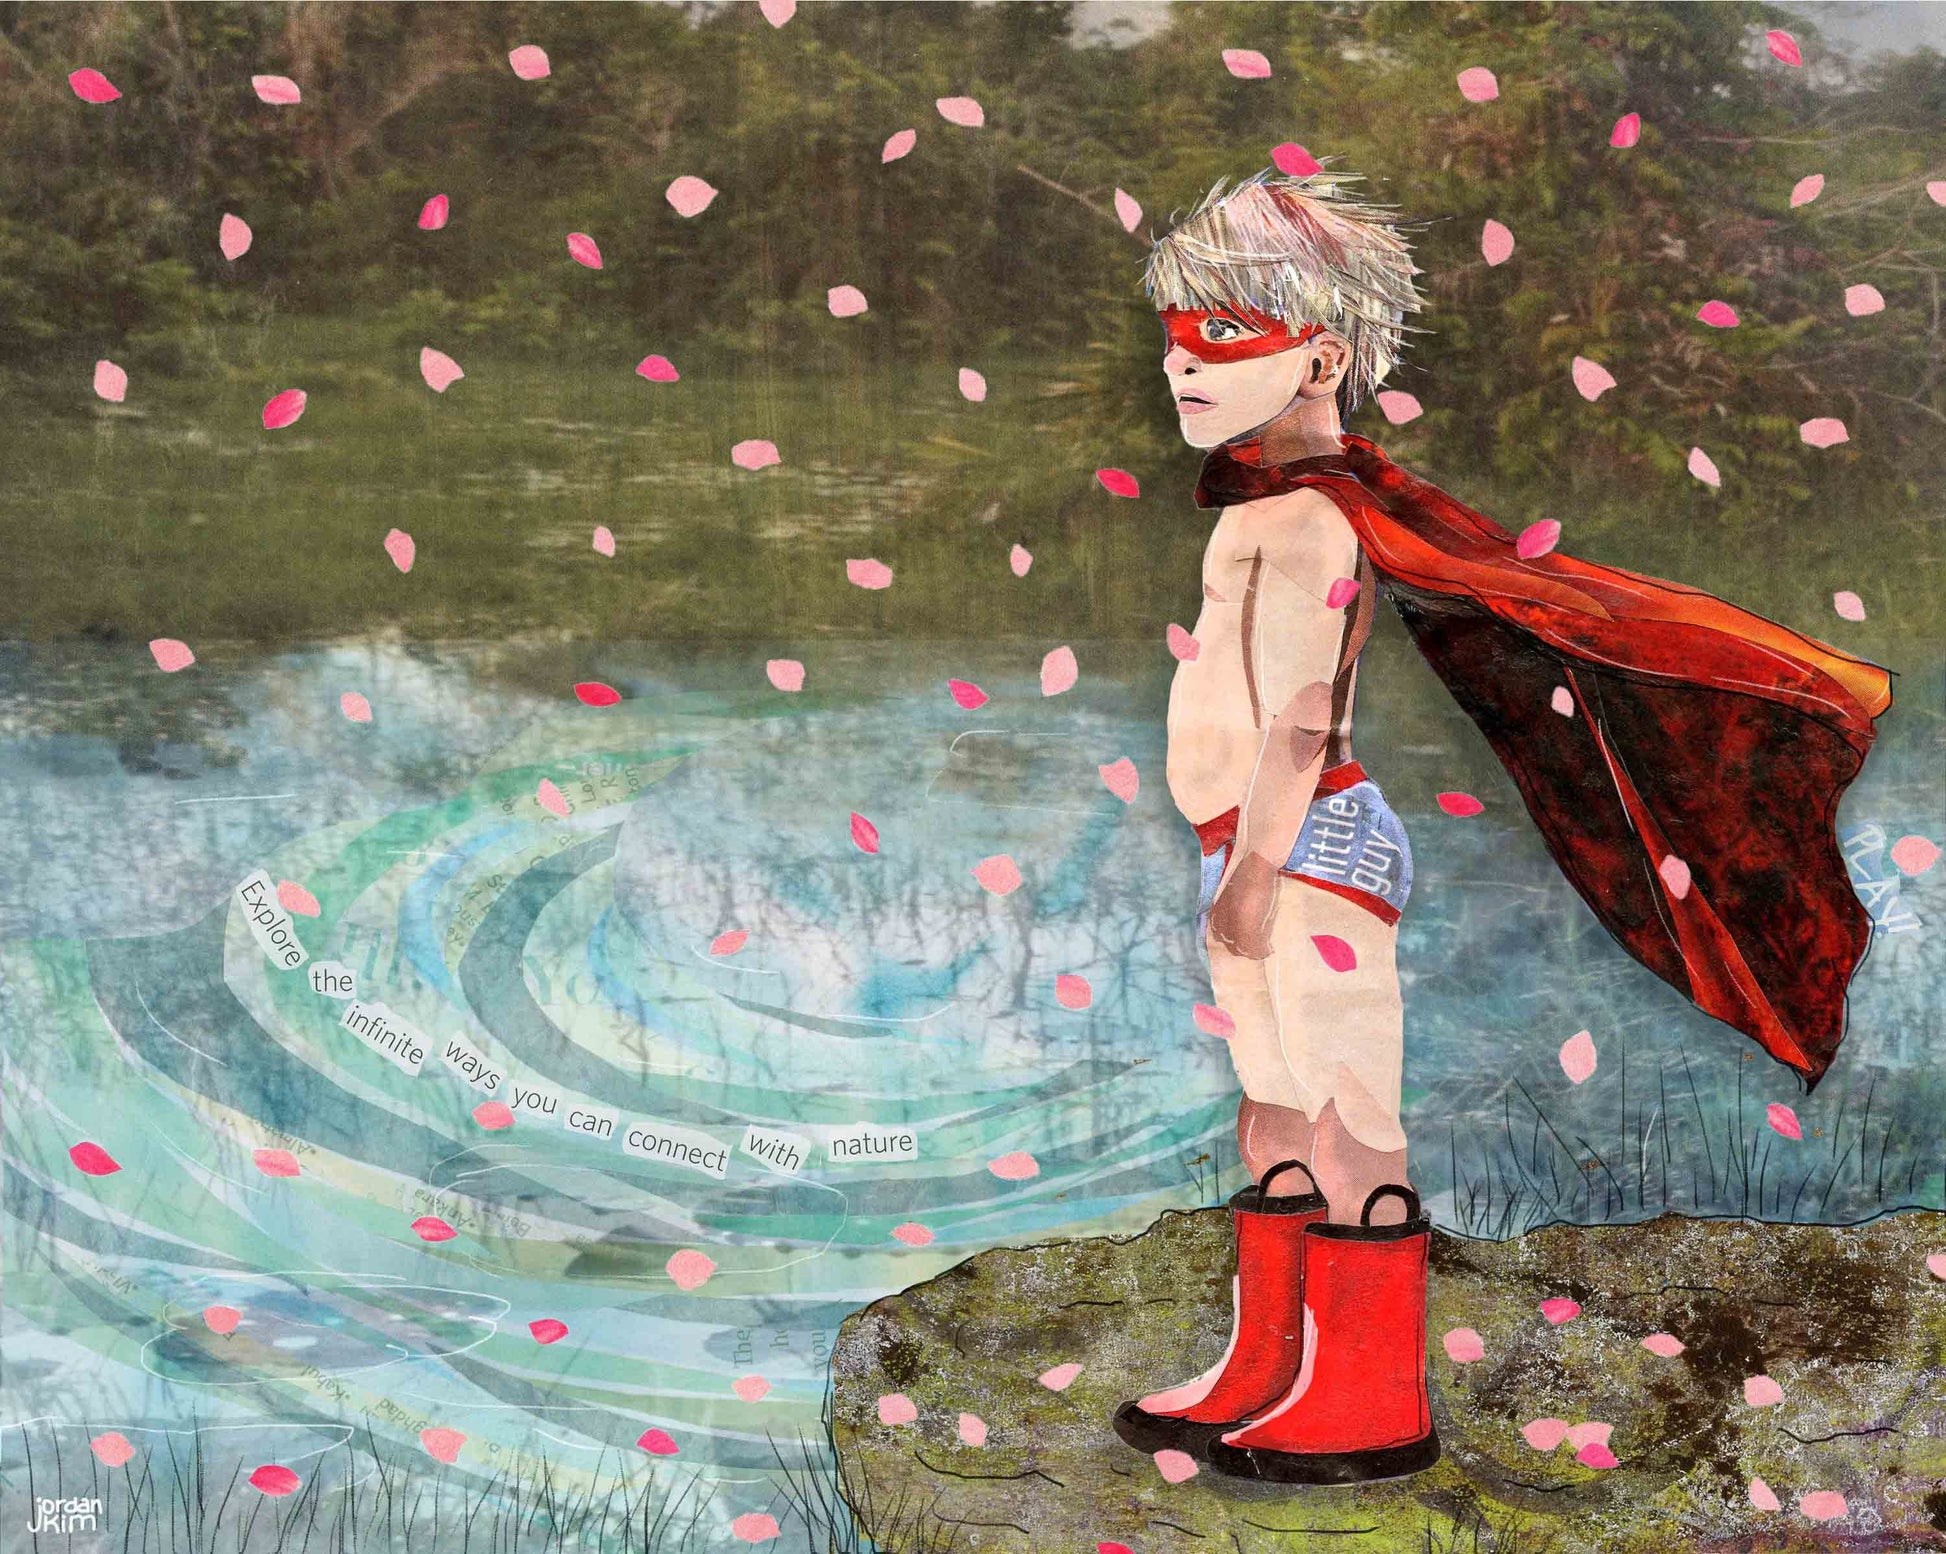 8x10 Art Print of a Little Boy with a Superhero Cape and Red Boots in Cherry Blossoms - Childhood - Funny - Teacher Gift